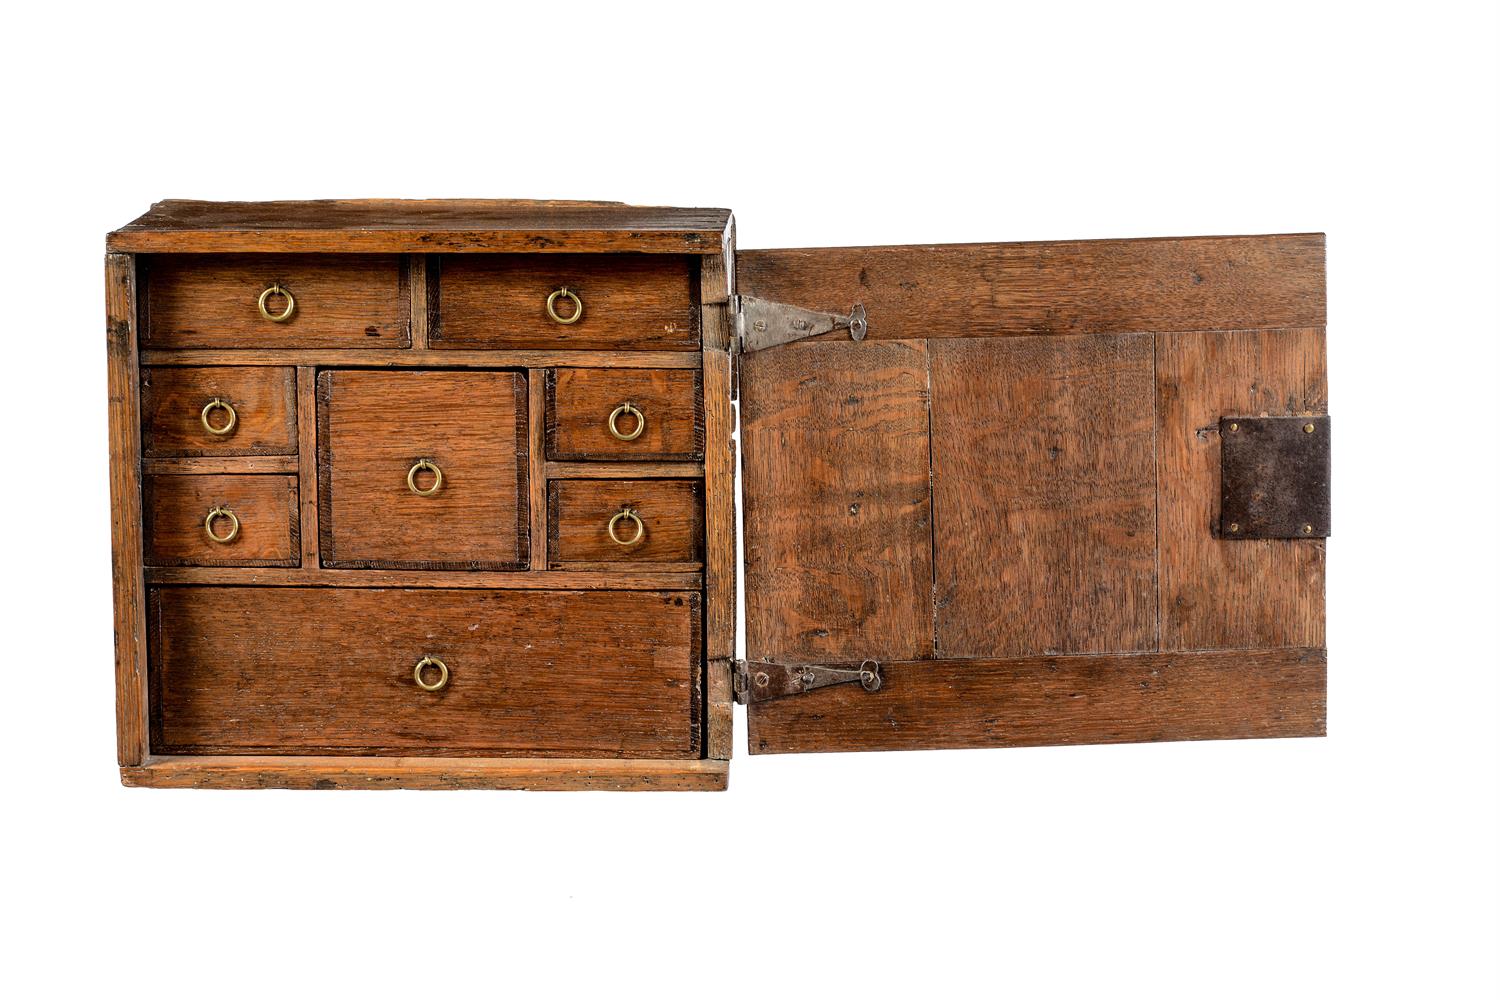 An oak spice or collectors cupboard - Image 3 of 3